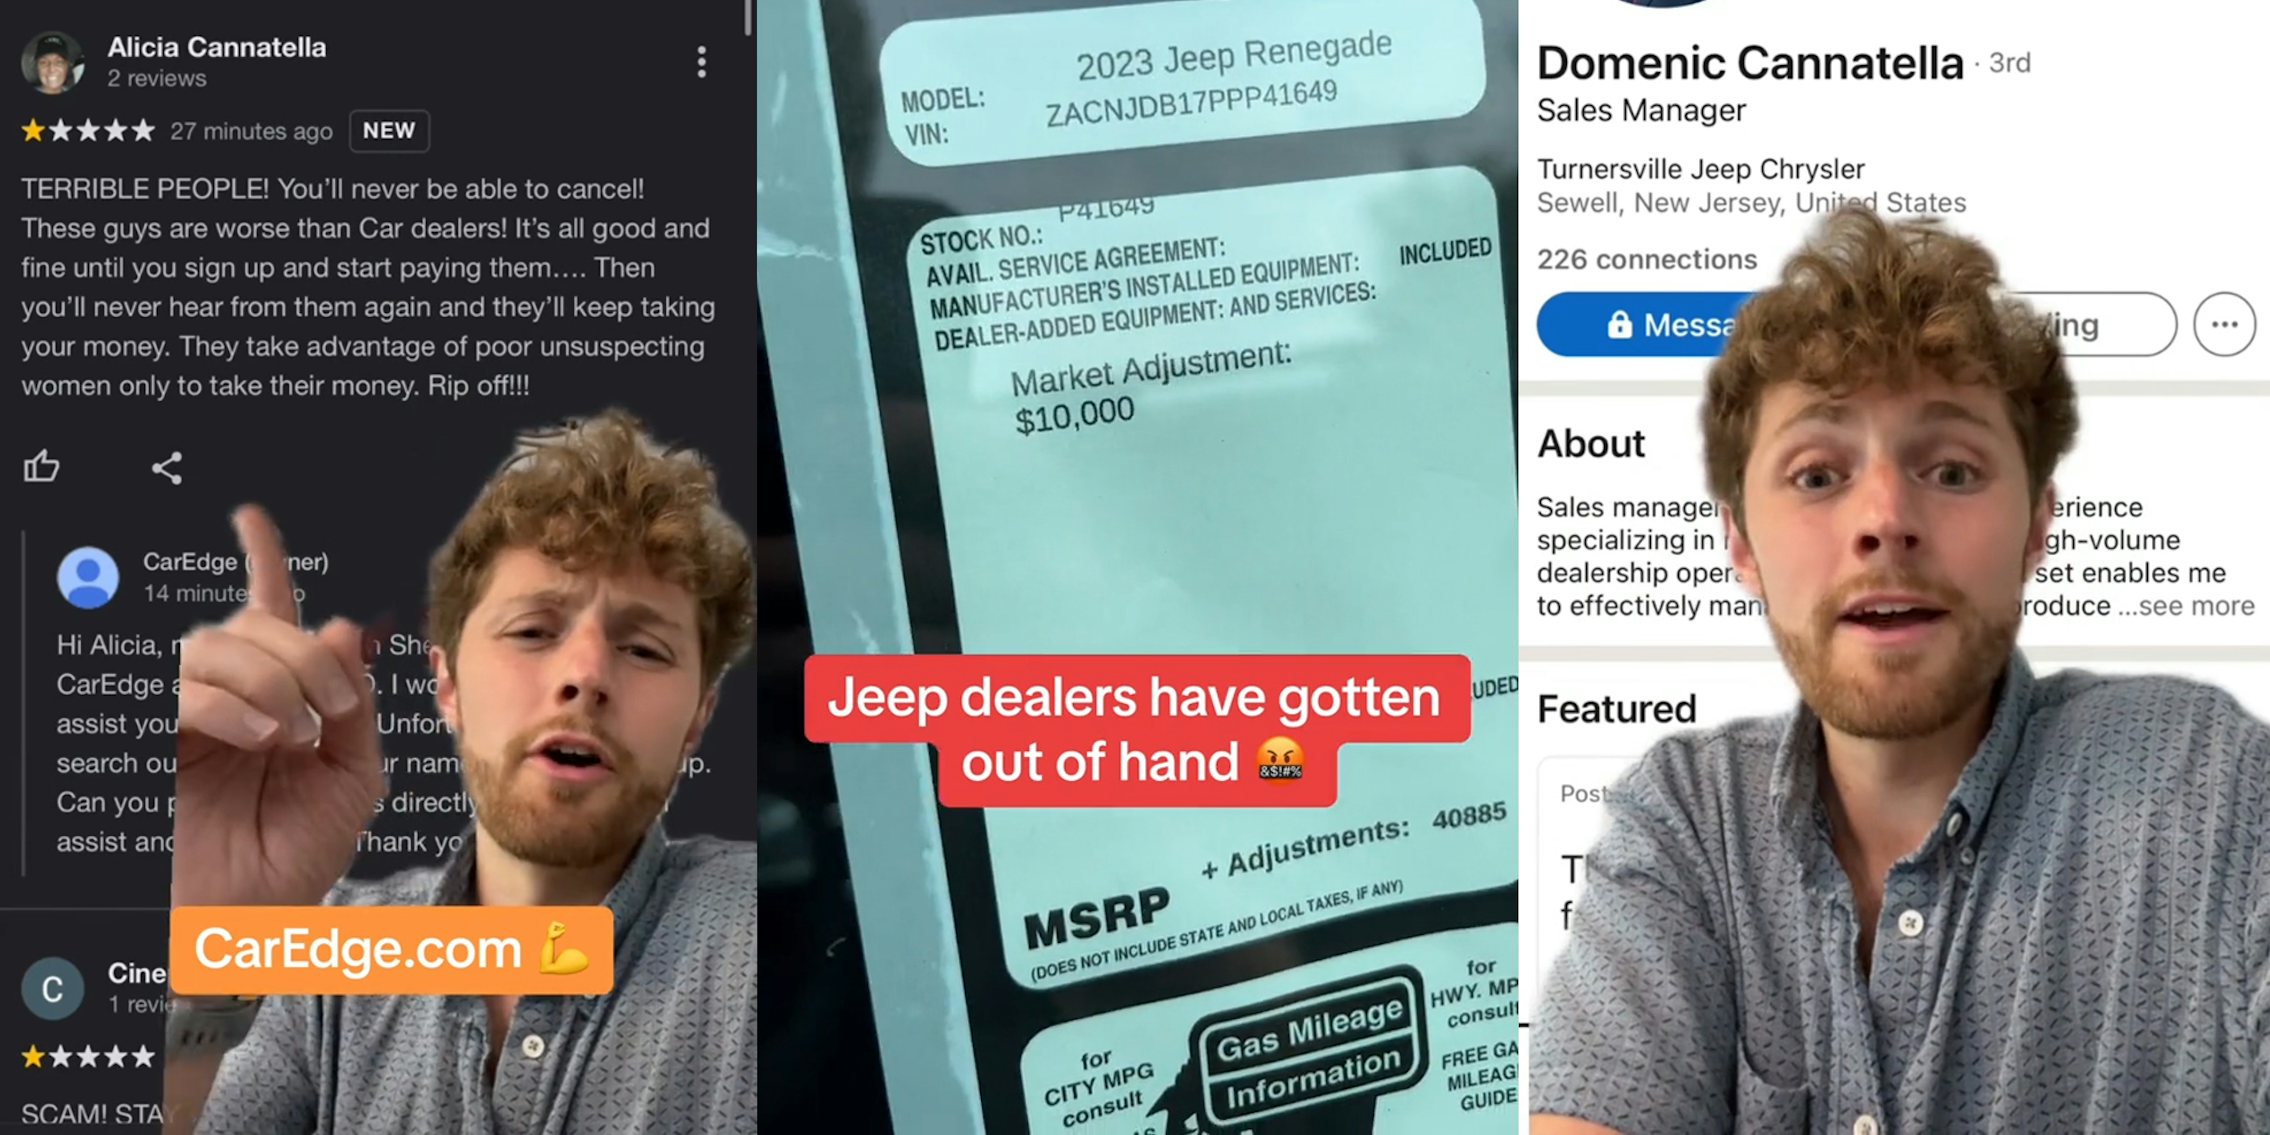 man greenscreen TikTok over image of 1 star review with caption 'CarEdge.com' (l) jeep with sticker in window showing market adjustment with caption 'Jeep dealers have gotten way out of hand' (l) man greenscreen TikTok over sale's manager Facebook with same last name as woman from review (r)